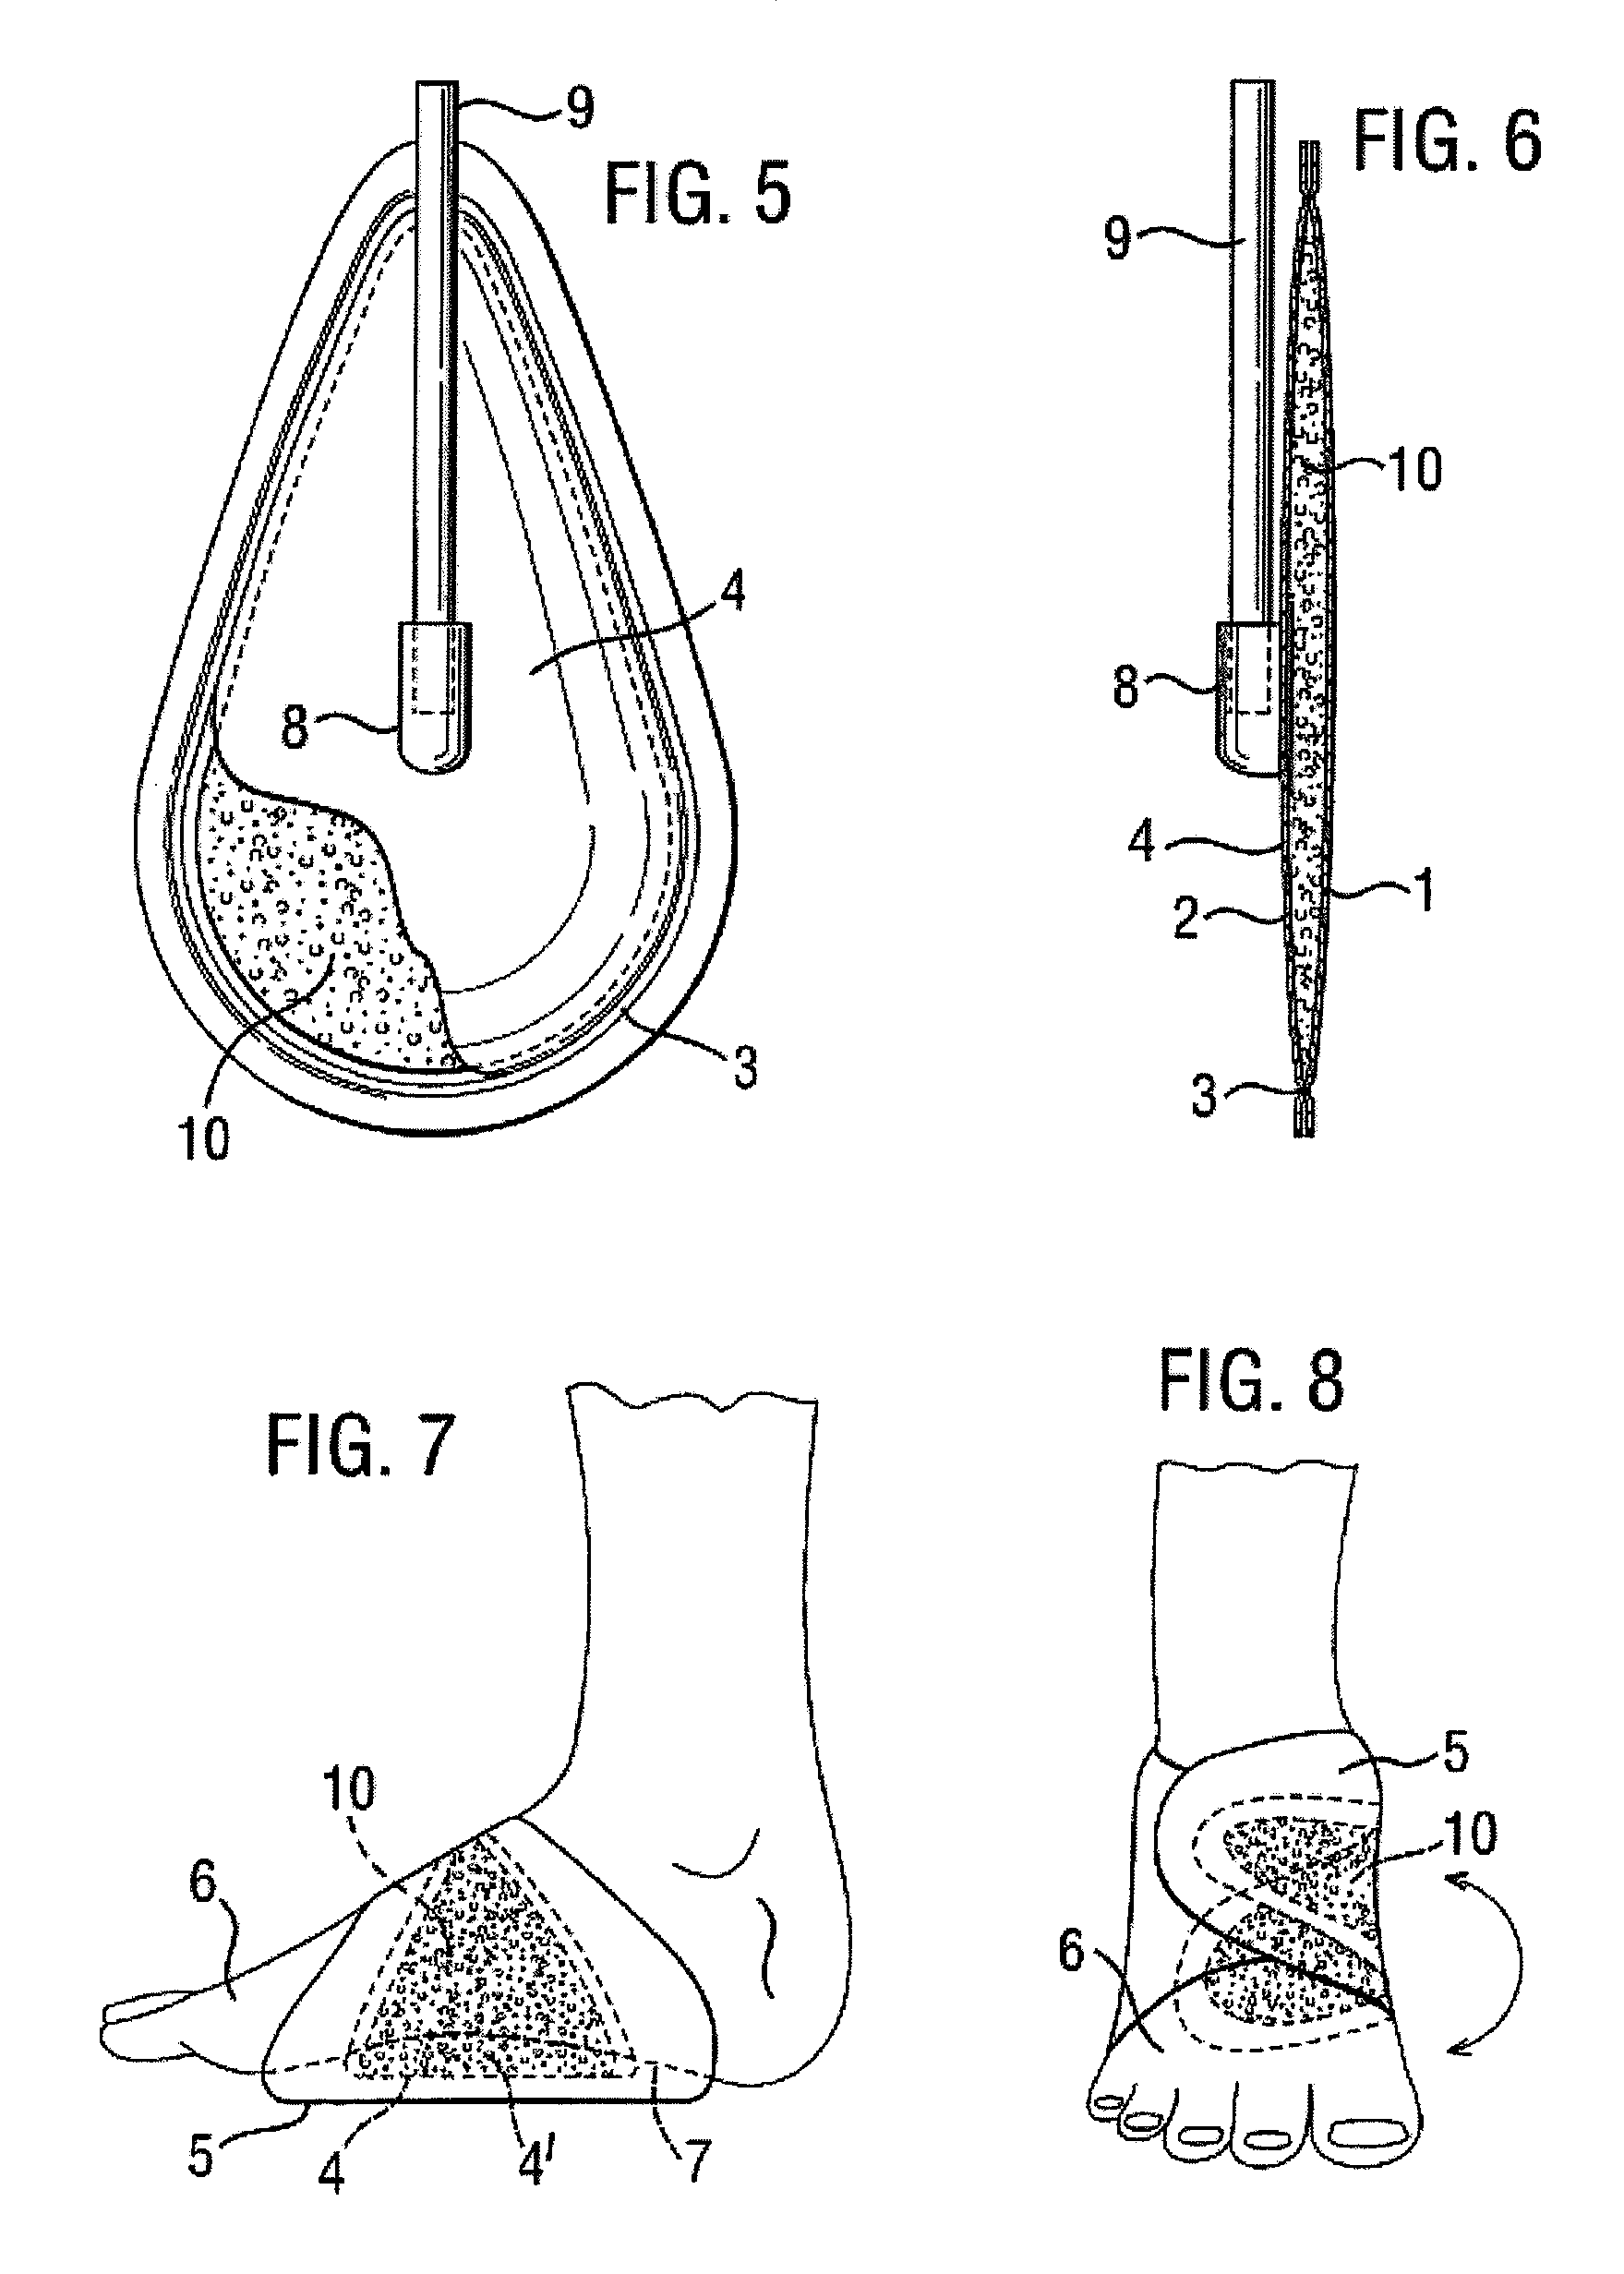 Inflatable device for use in impulse therapy